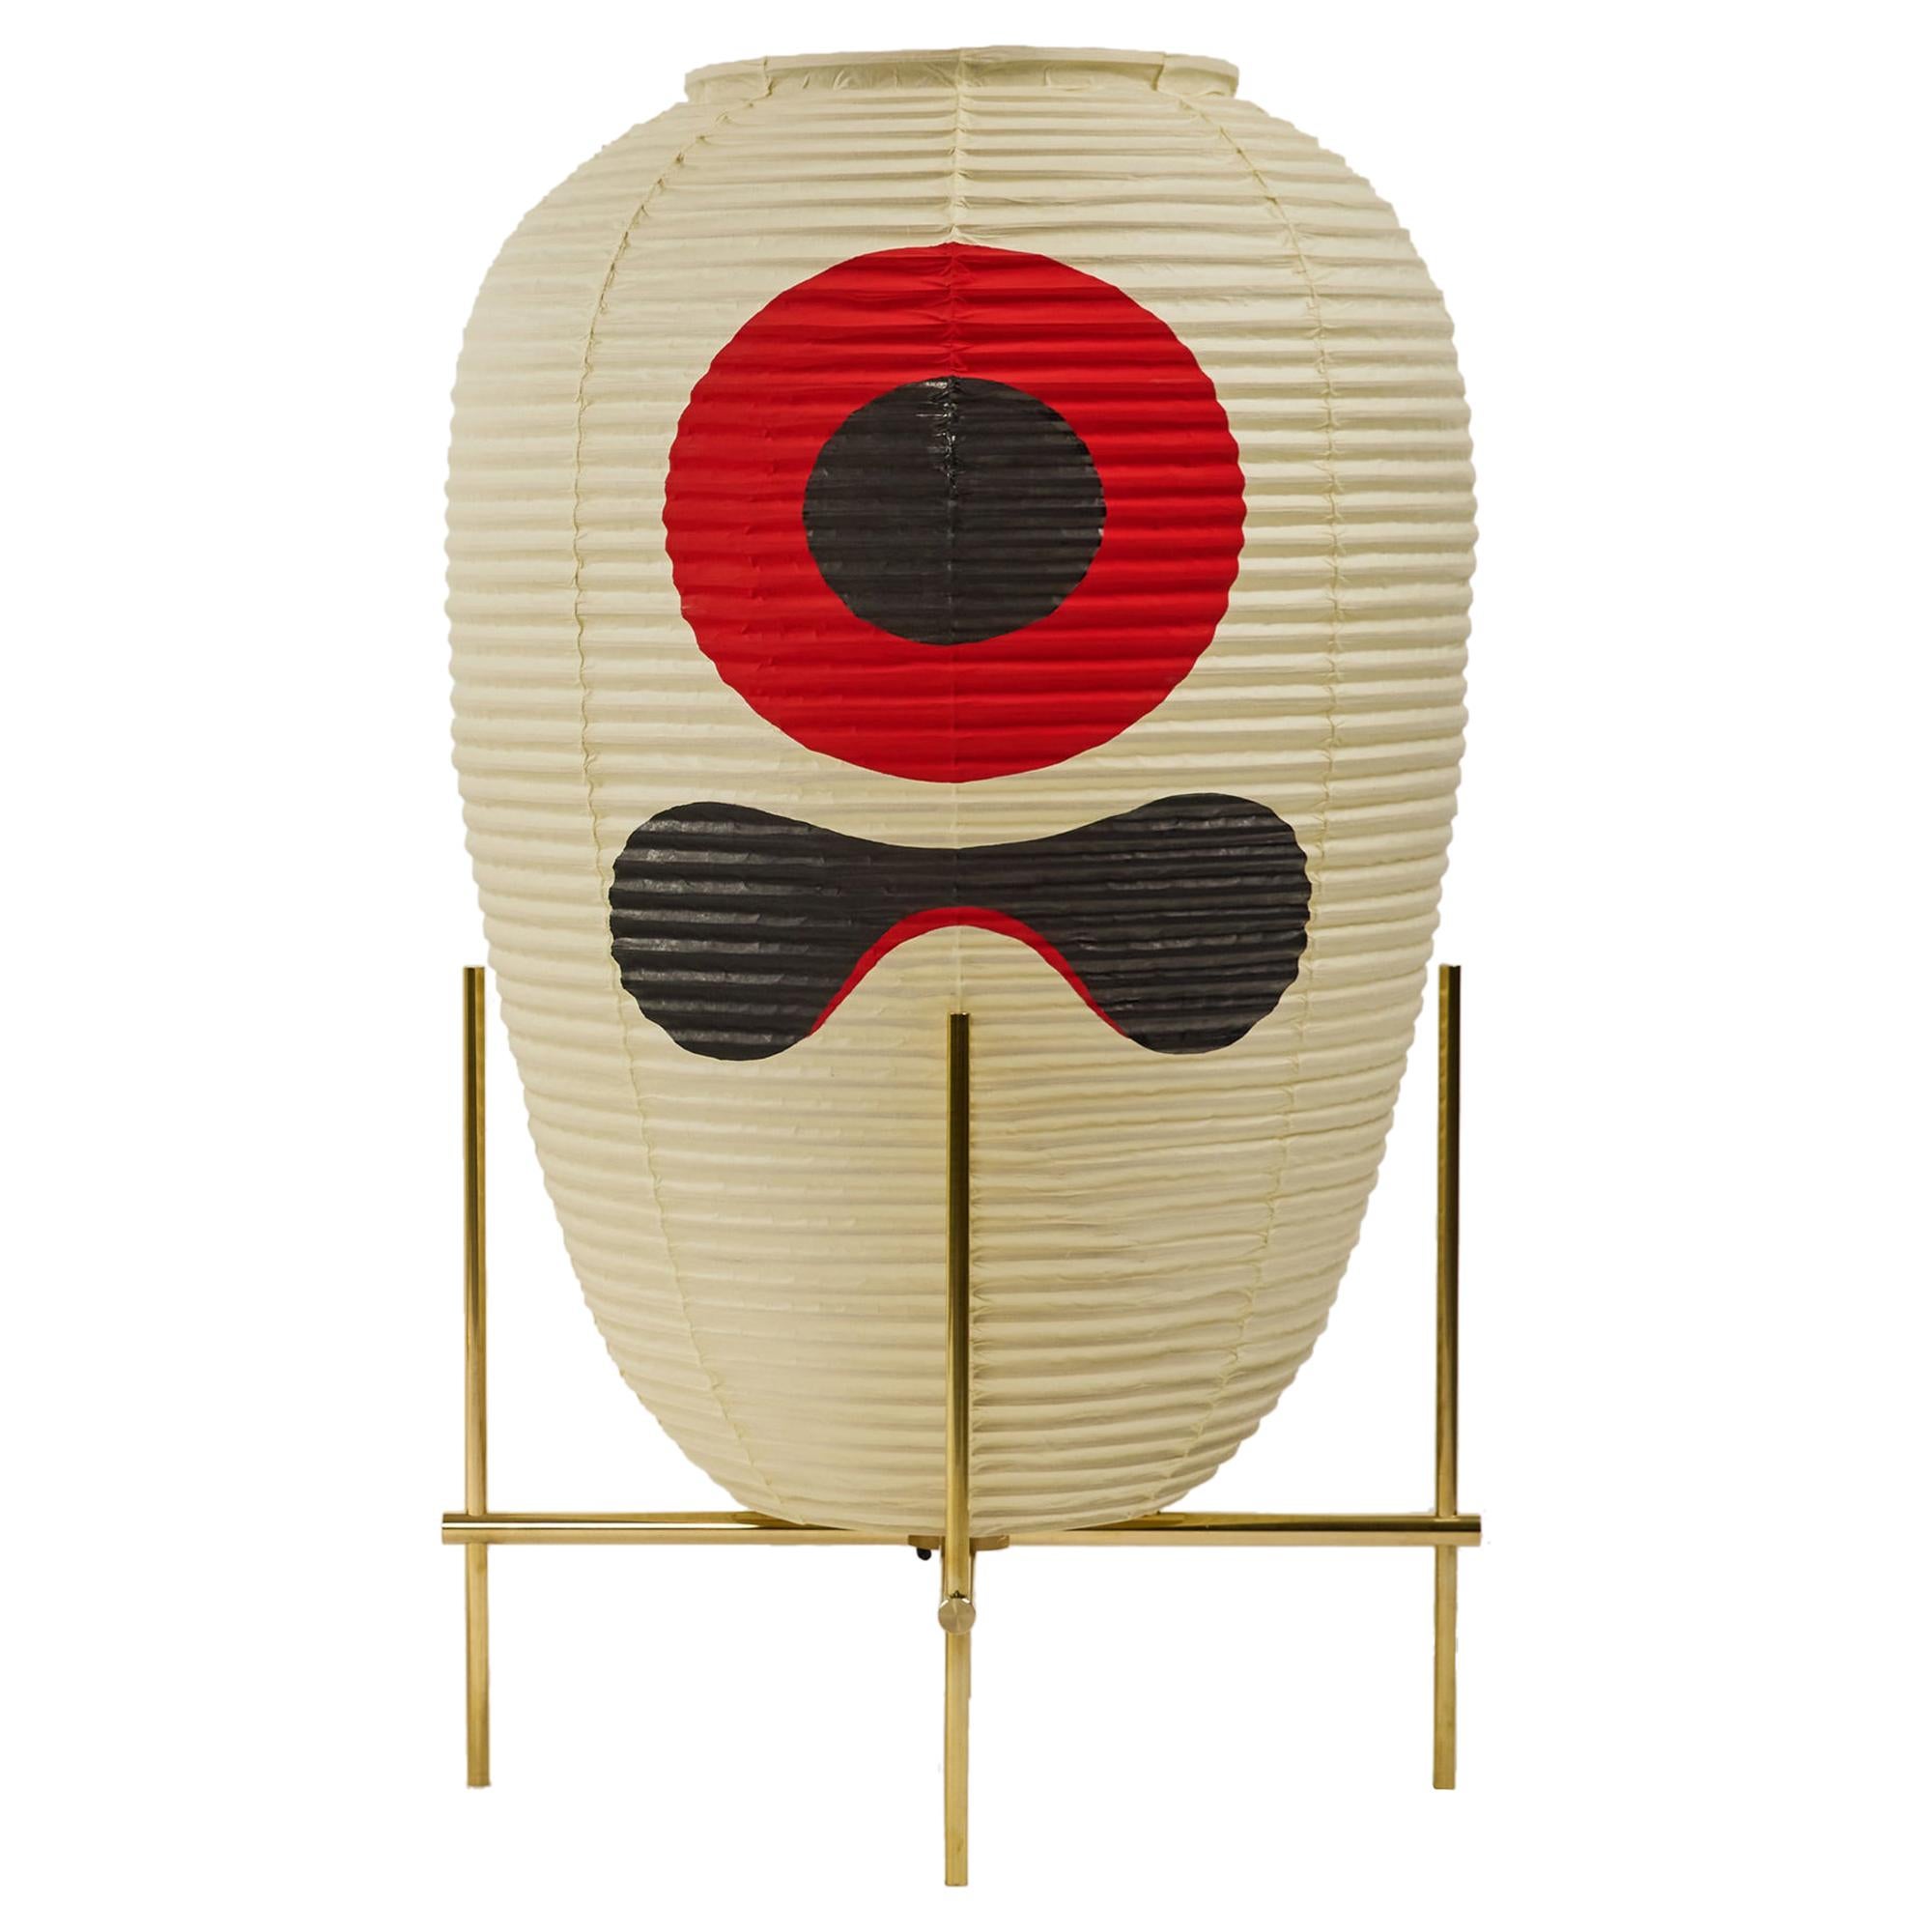 Contemporary Japanese Chochin Floor Lamp Limited Edition #1 Zen Washi For Sale